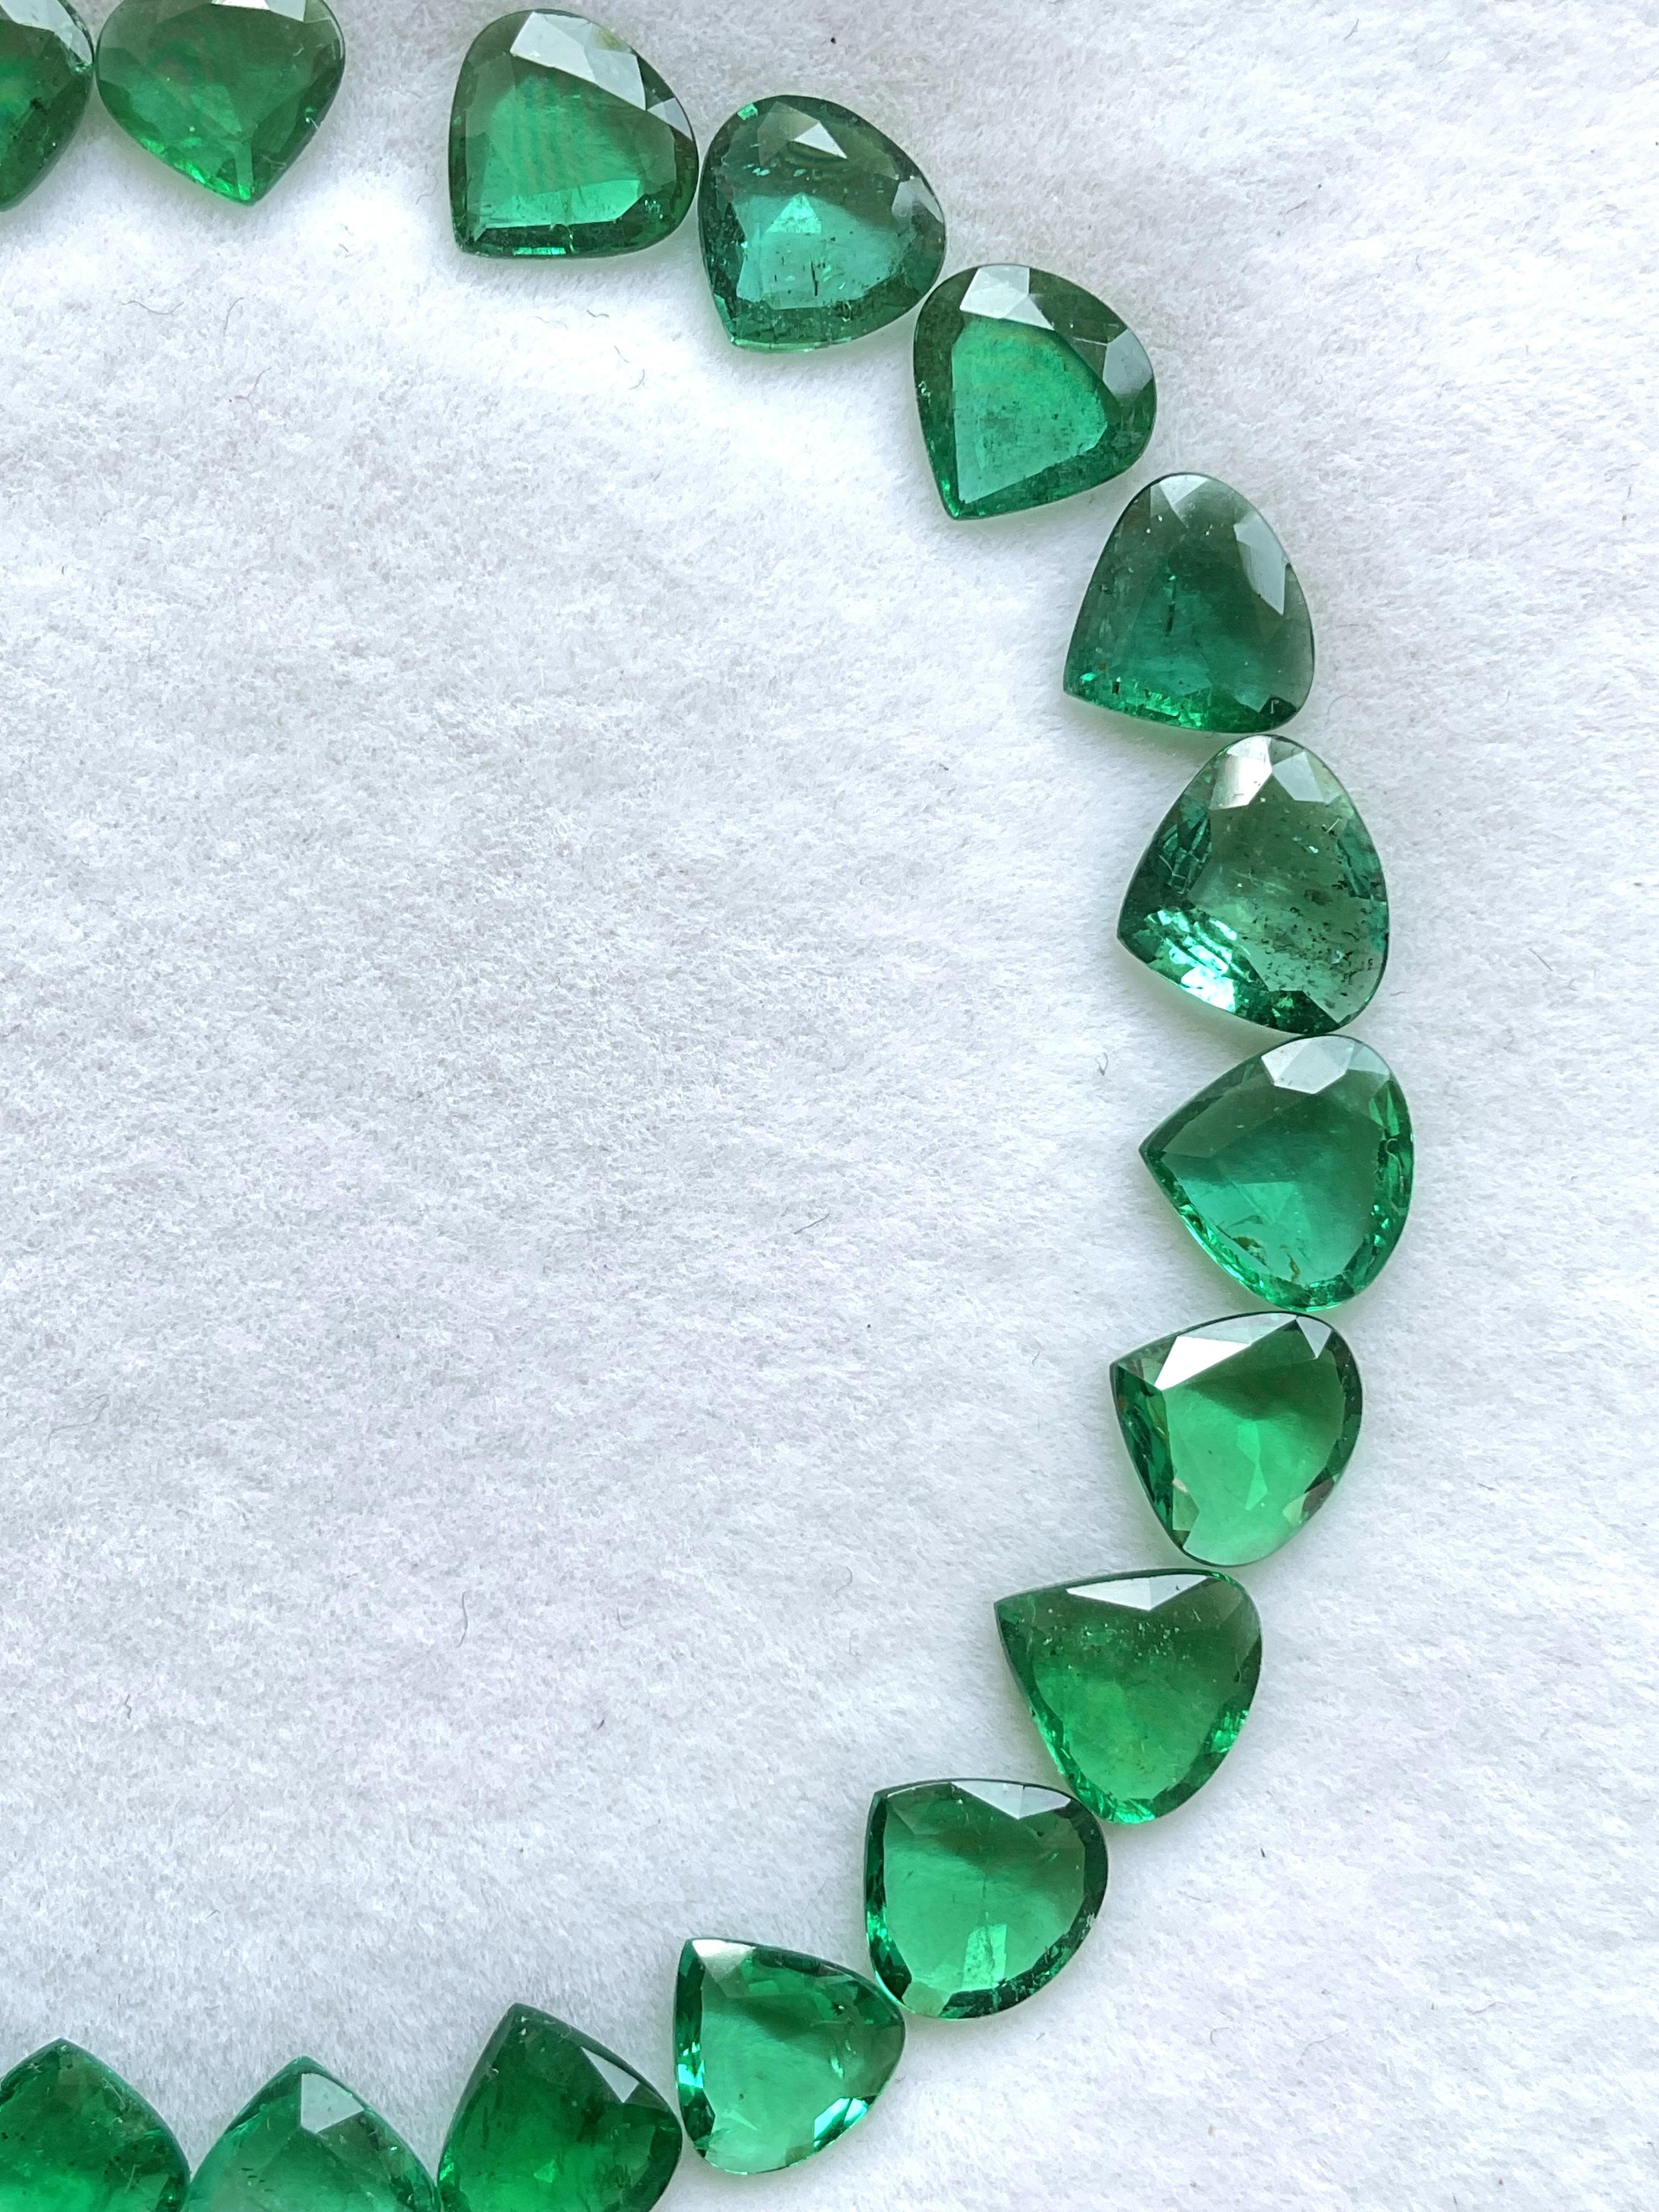 19.52 cts Zambian Emerald Heart Layout Suite Faceted Cut stone for fine Jewelry 1